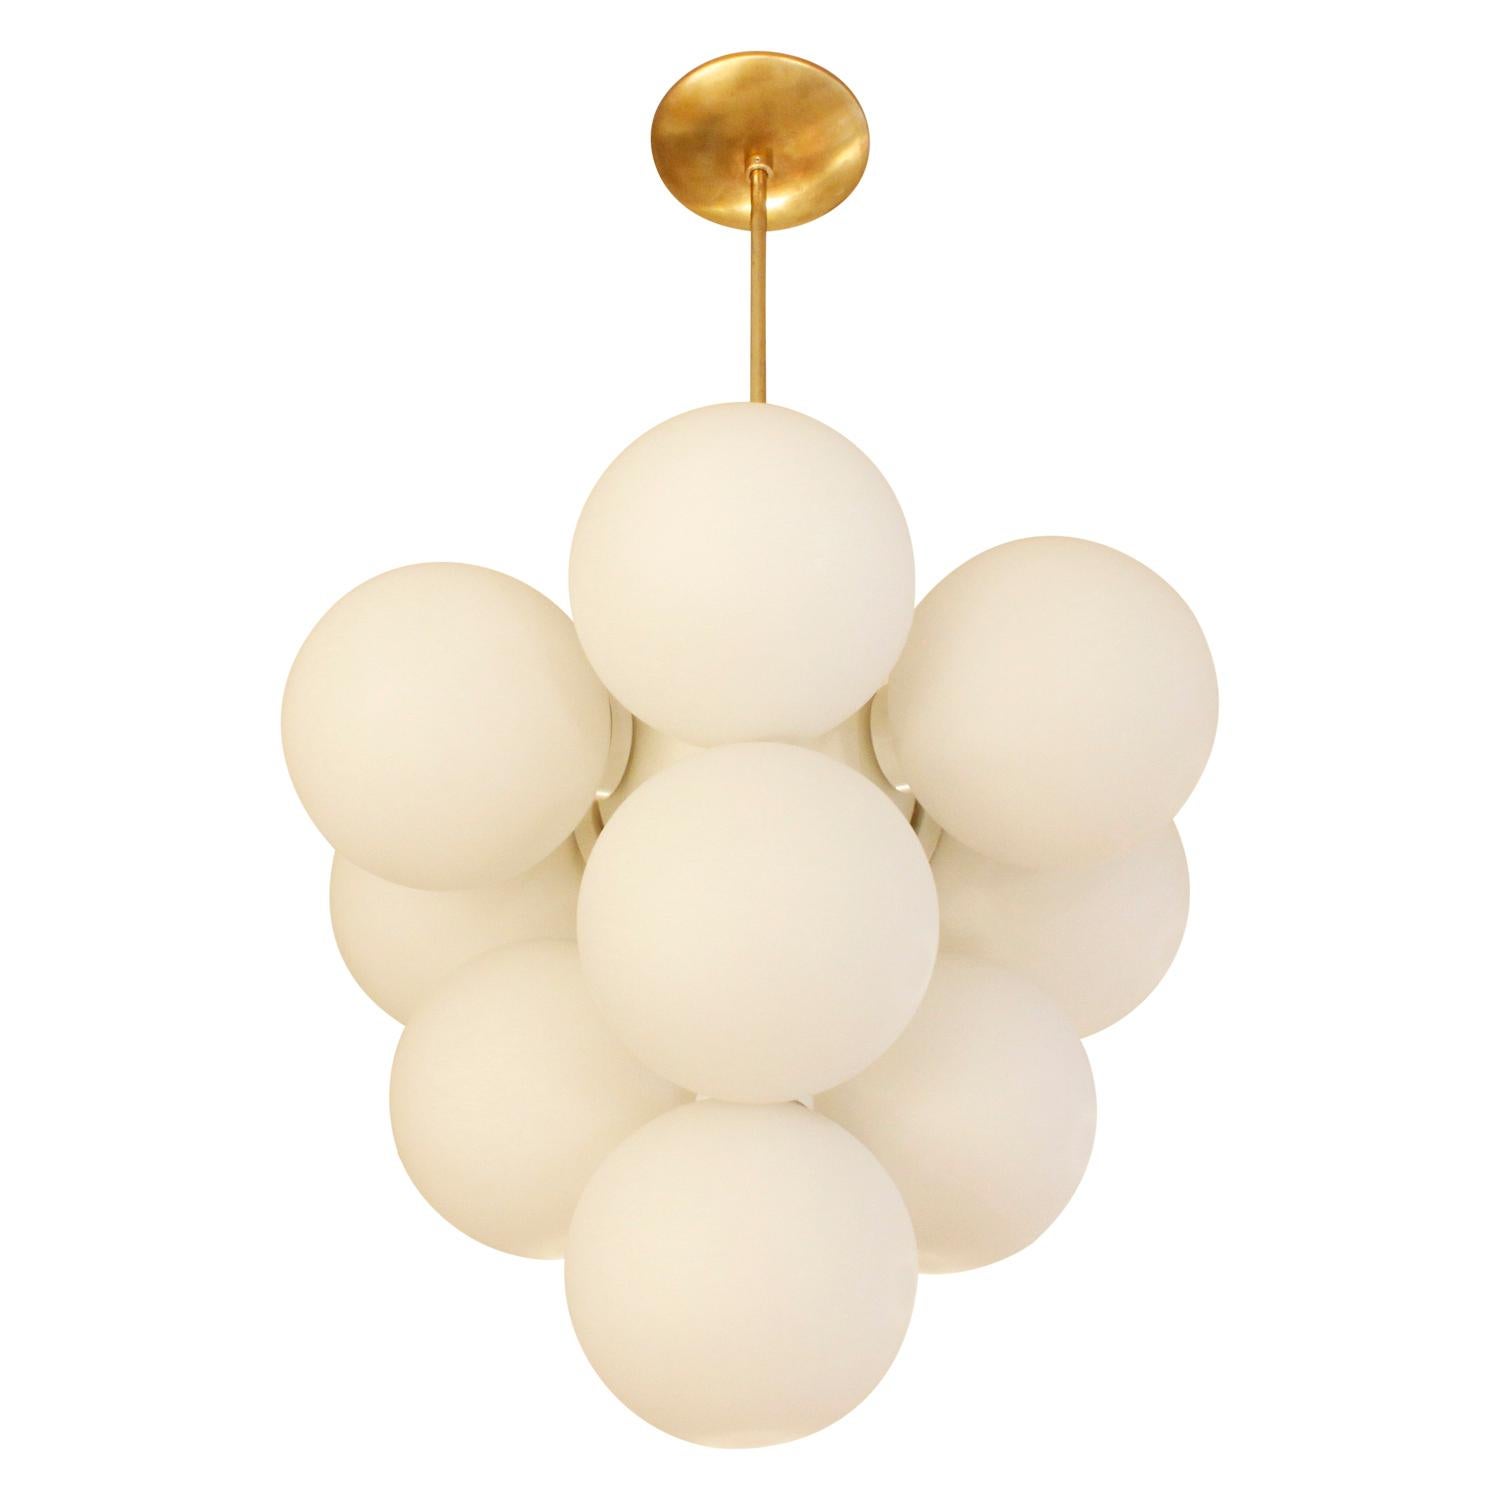 Sculptural chandelier in brass with white glass globes, German, 1960s.